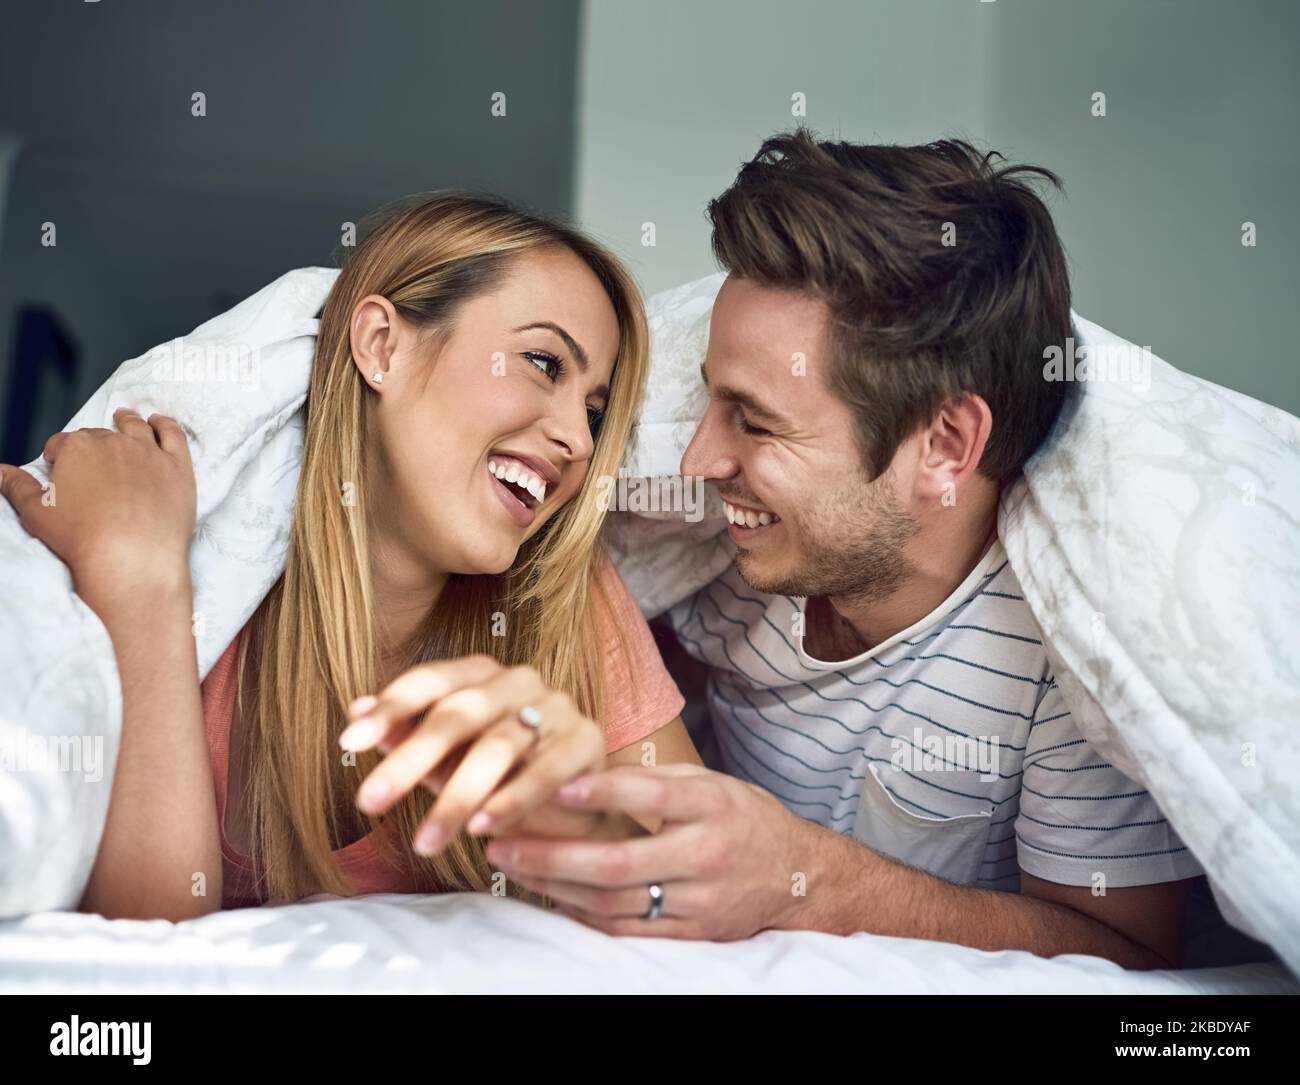 Your happy makes me happy. a happy young couple relaxing under a duvet together in bed. Stock Photo